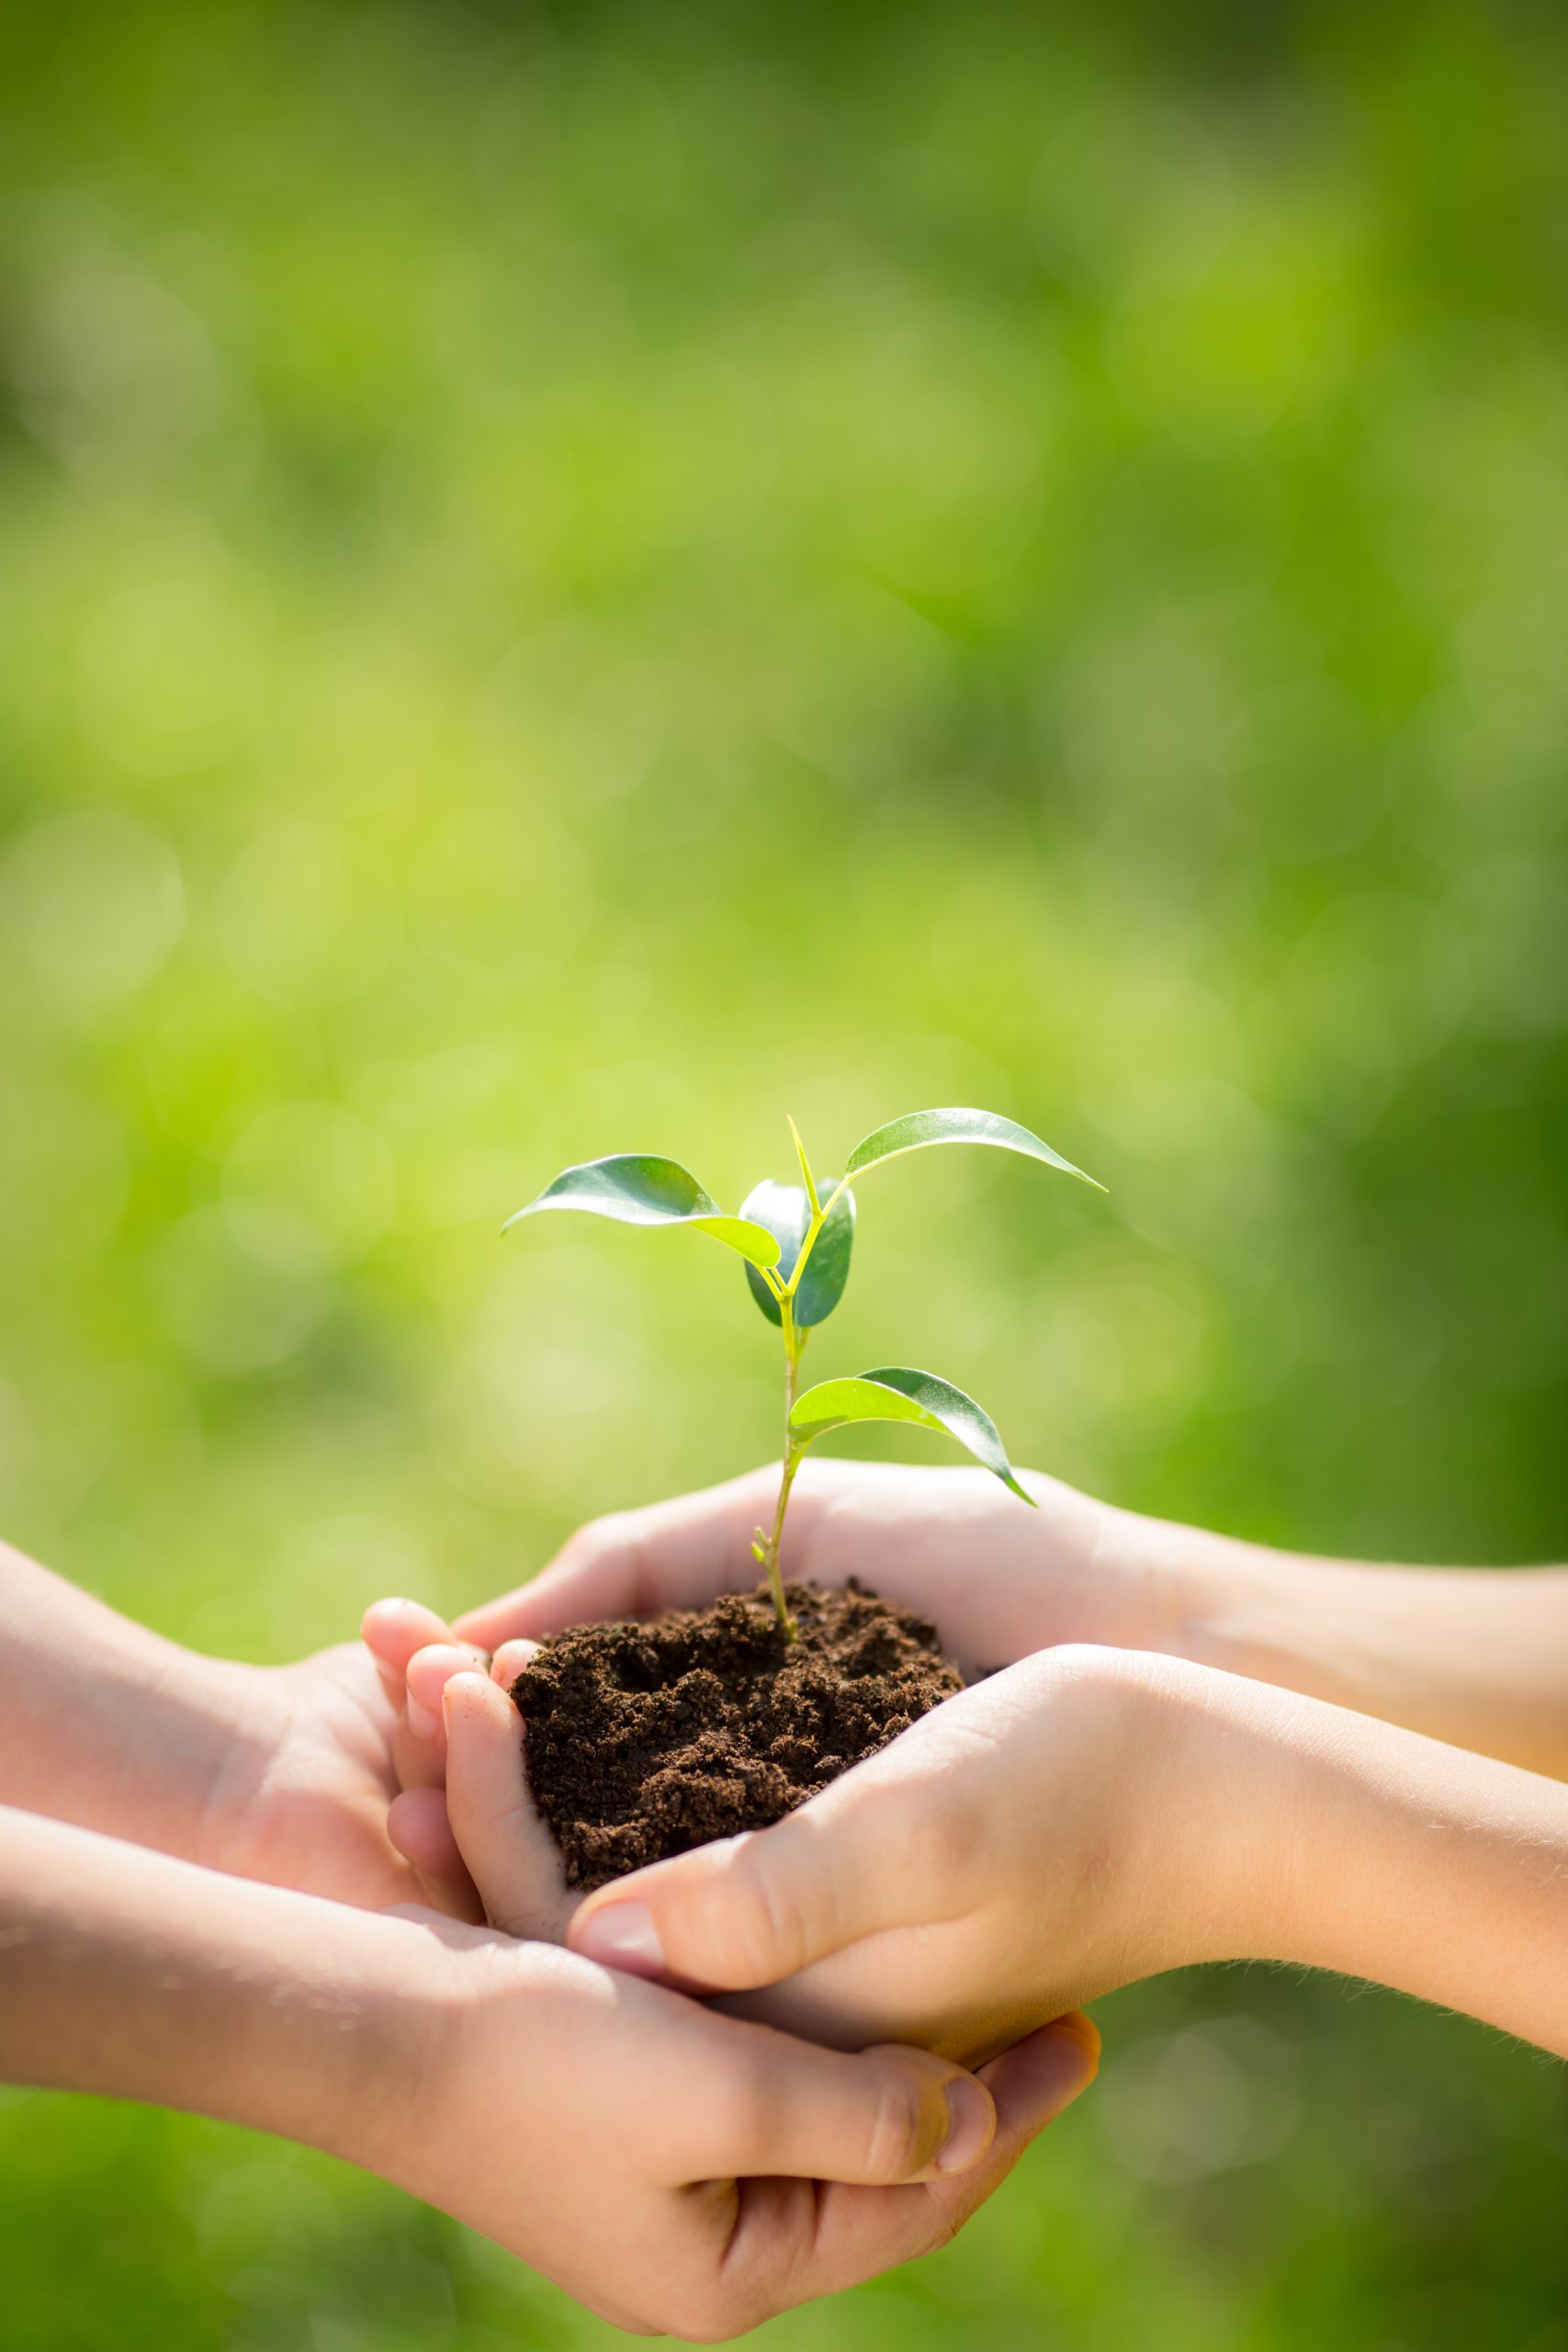  Children holding young plant in hands against green spring background. Earth day ecology holiday concept